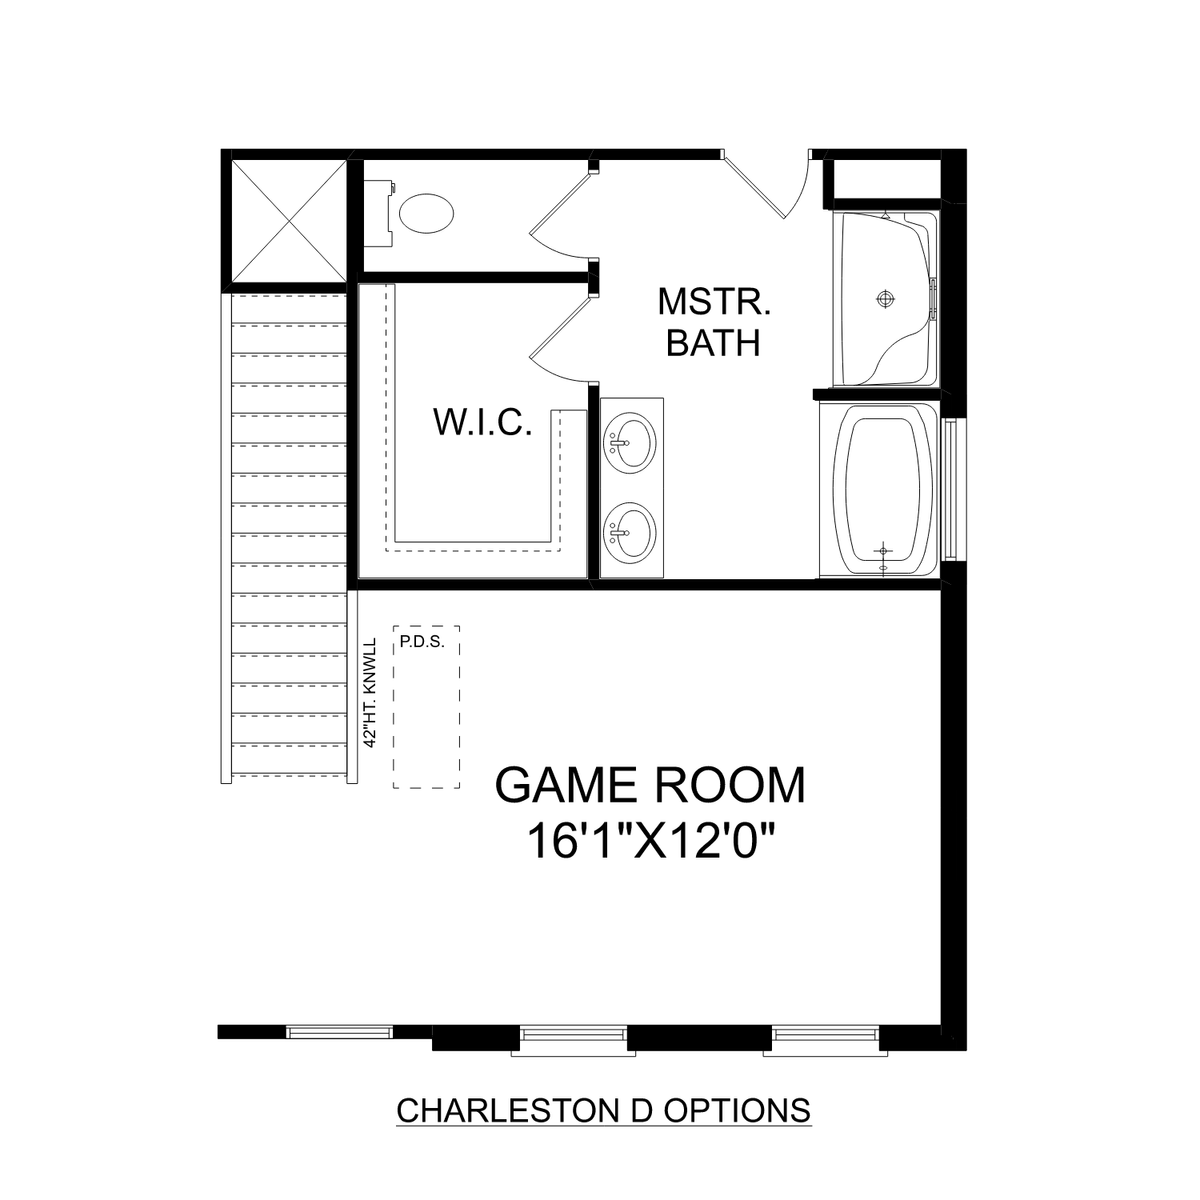 3 - The Charleston D buildable floor plan layout in Davidson Homes' Hollon Meadows community.